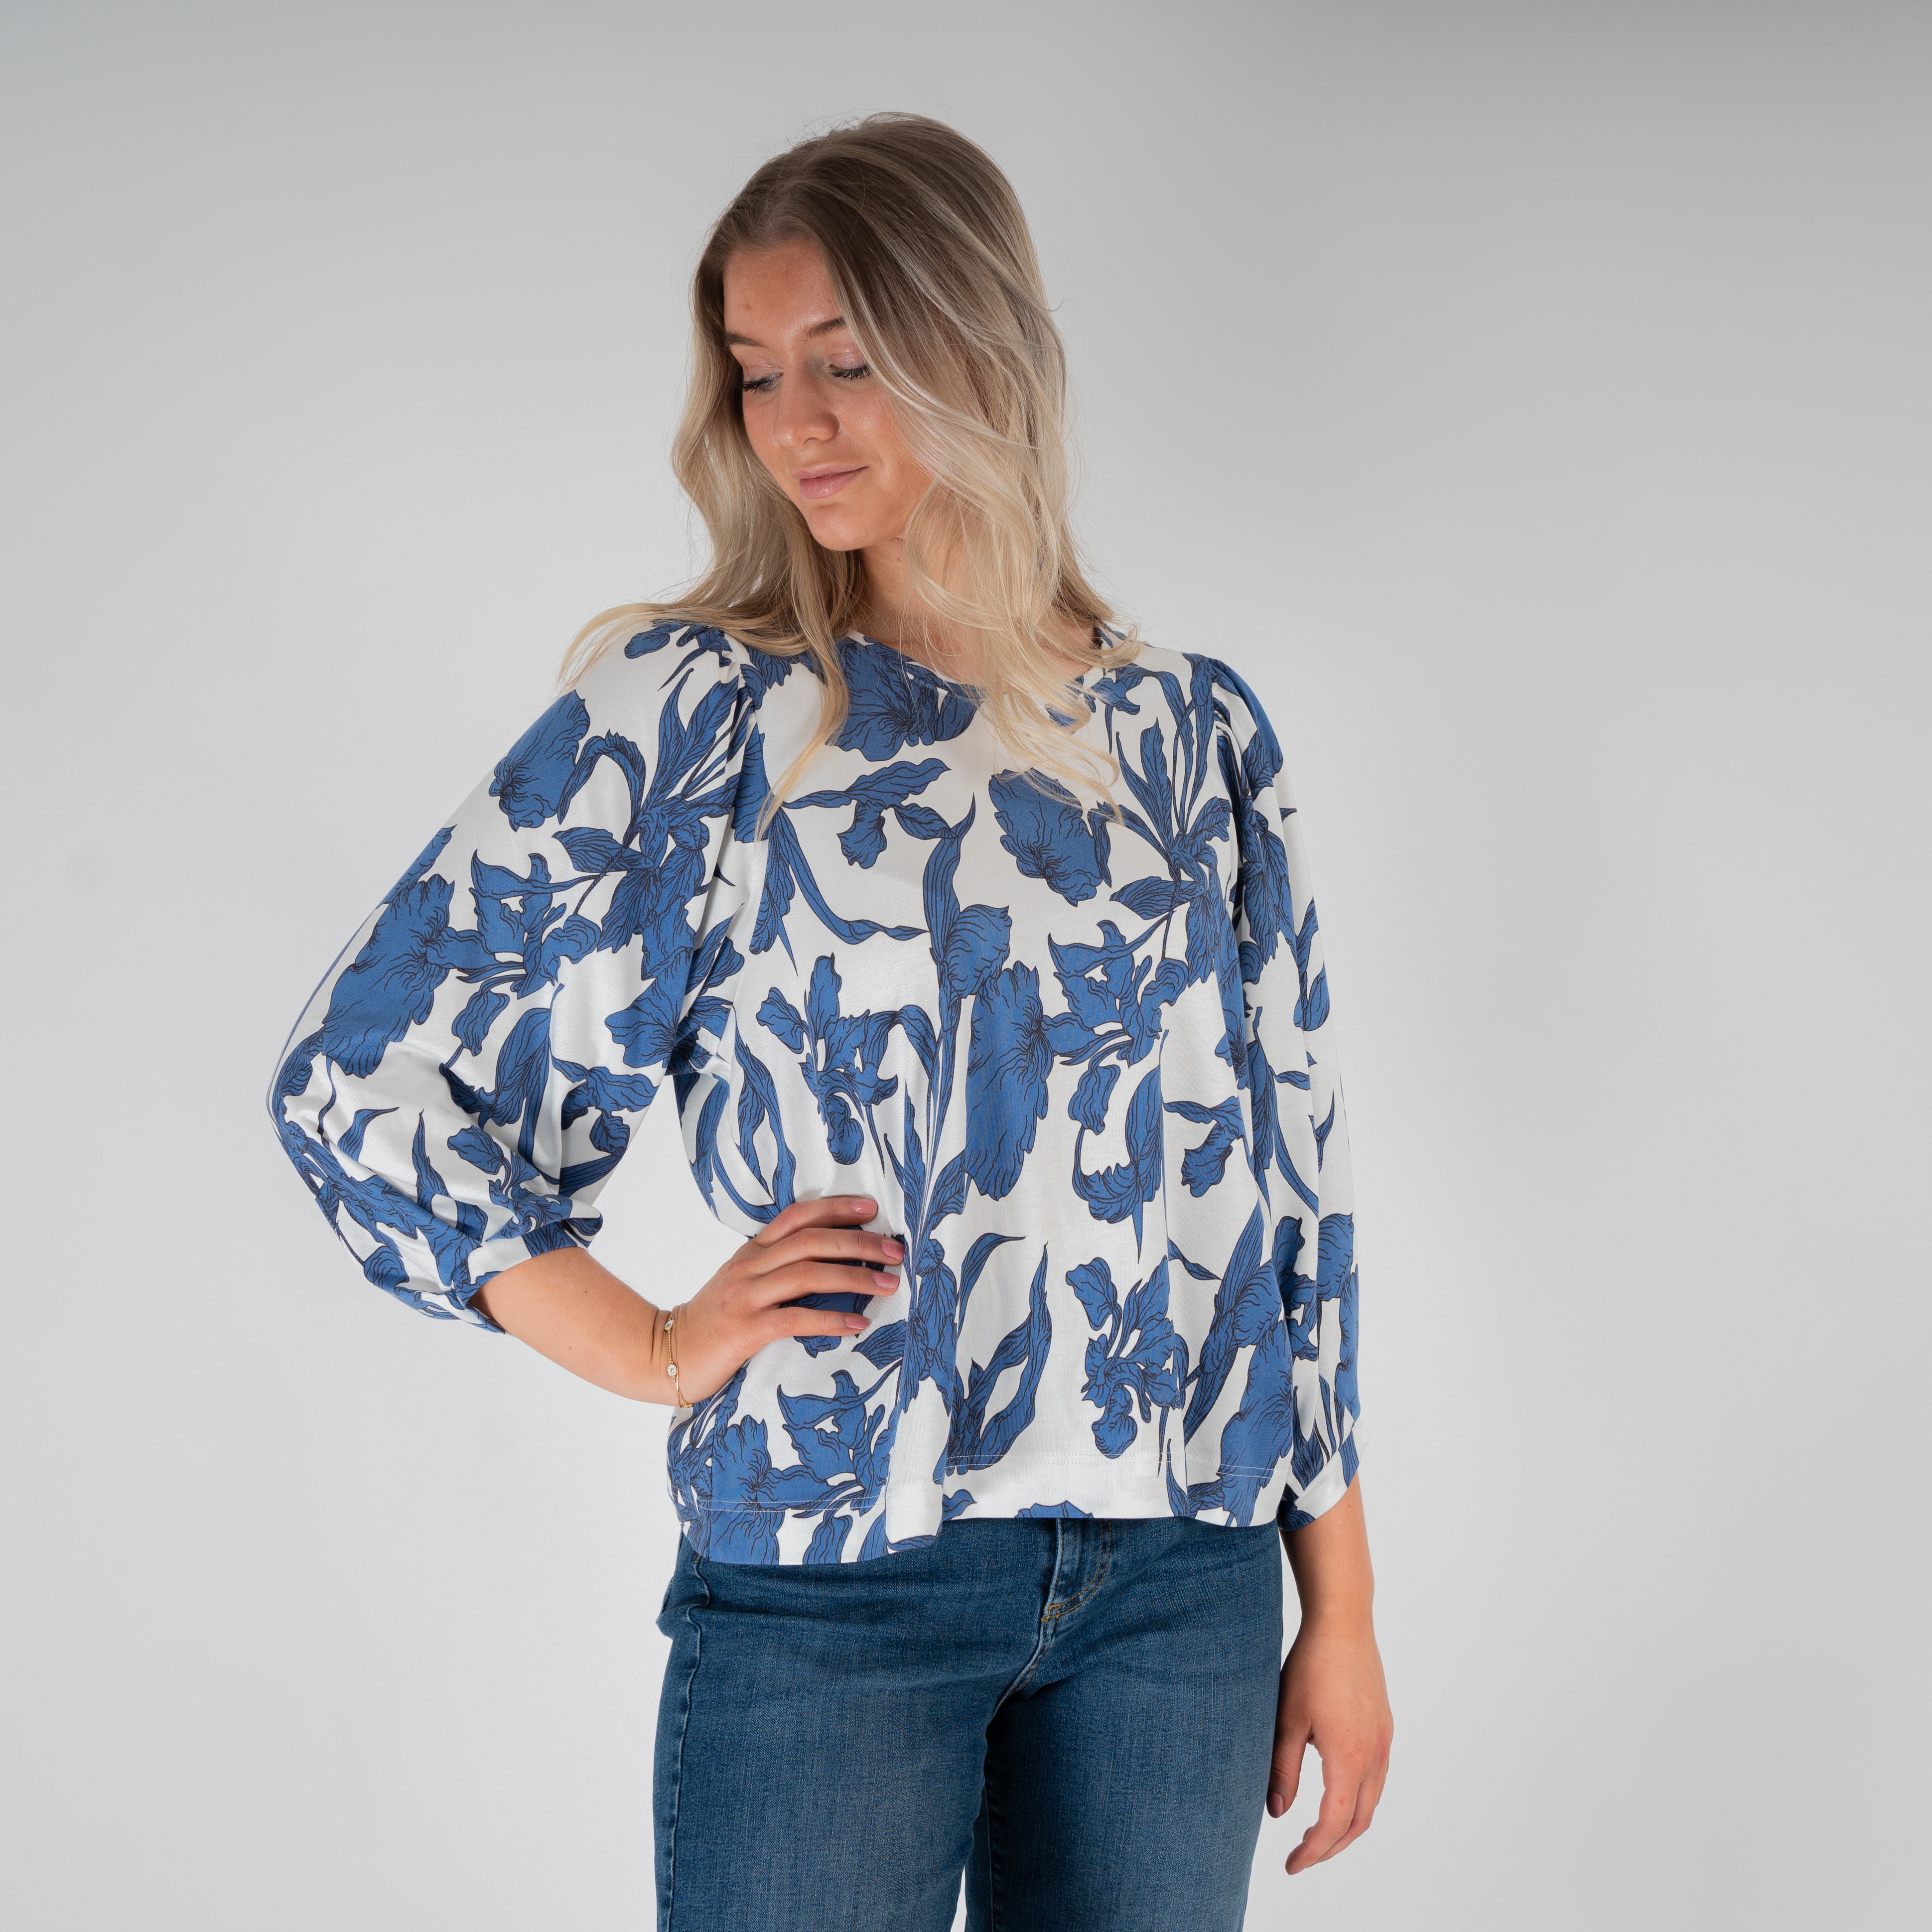 Aimable blouse - beauty soft white